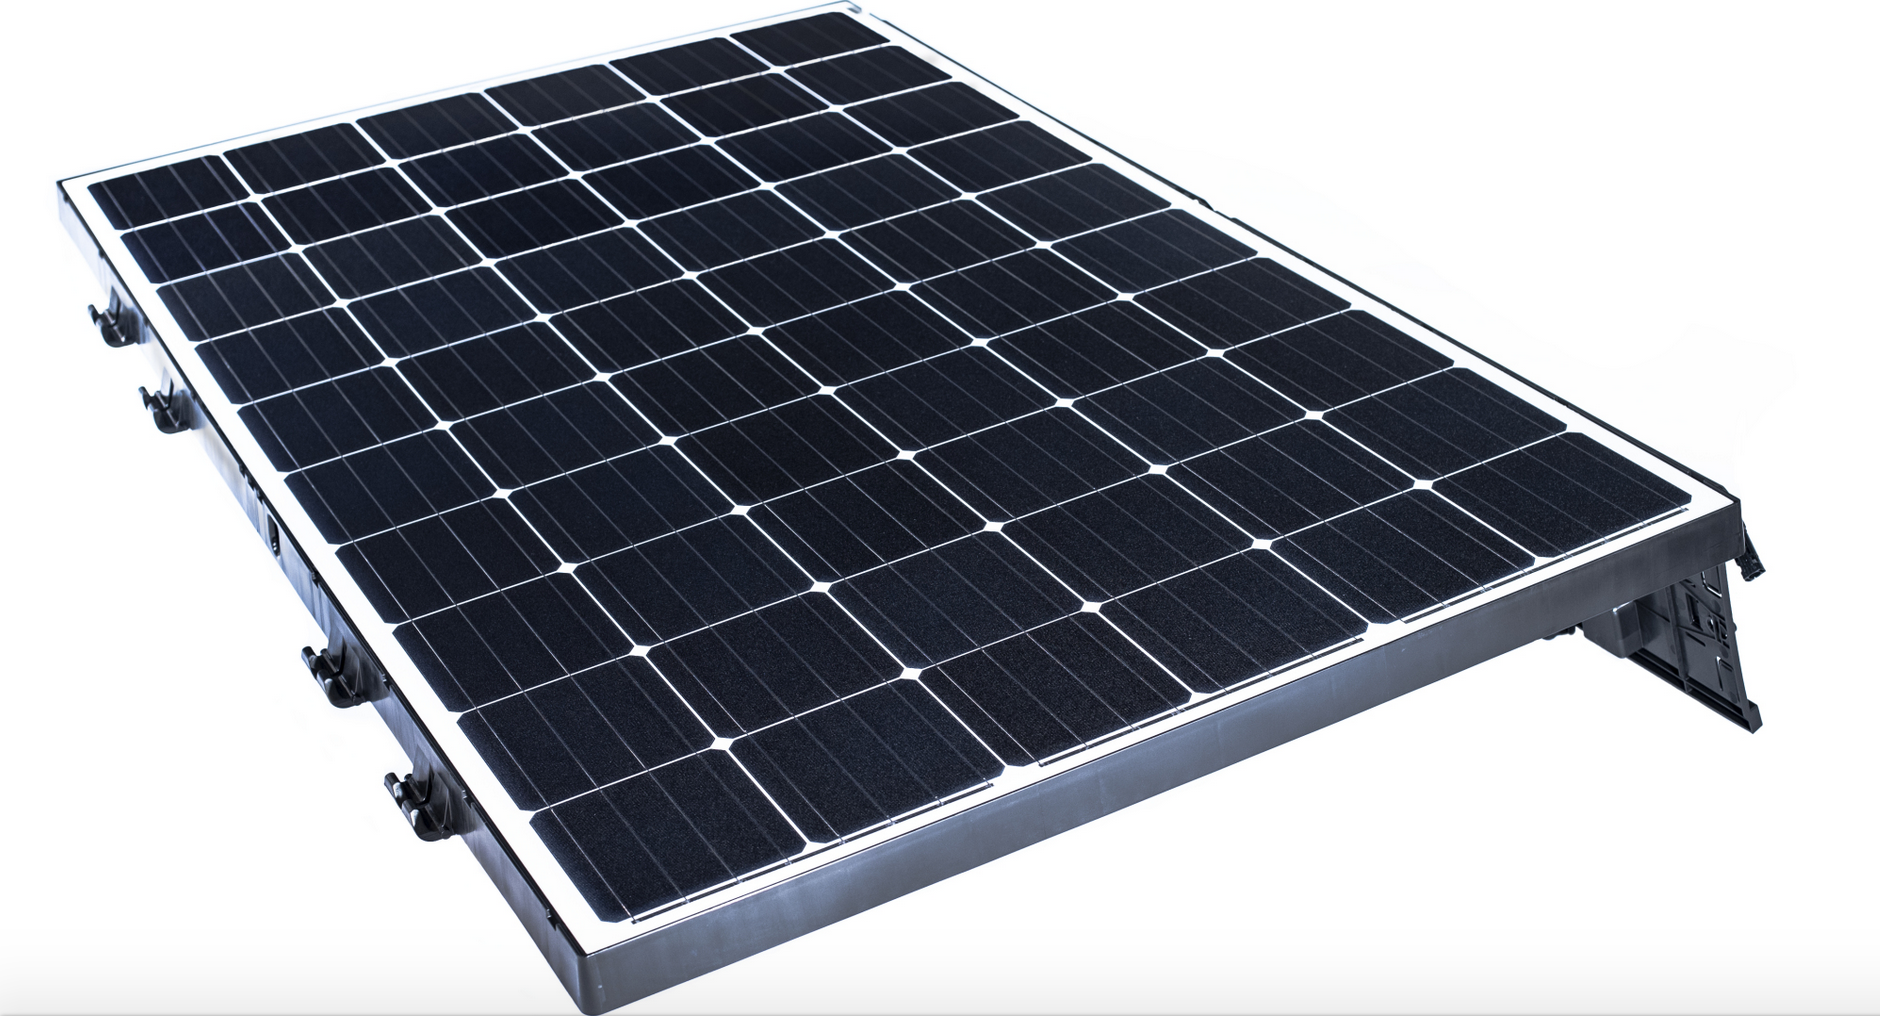 Beamreach Solar has introduced Sprint, a lightweight photovoltaic solar panel system for flat commercial roofs.